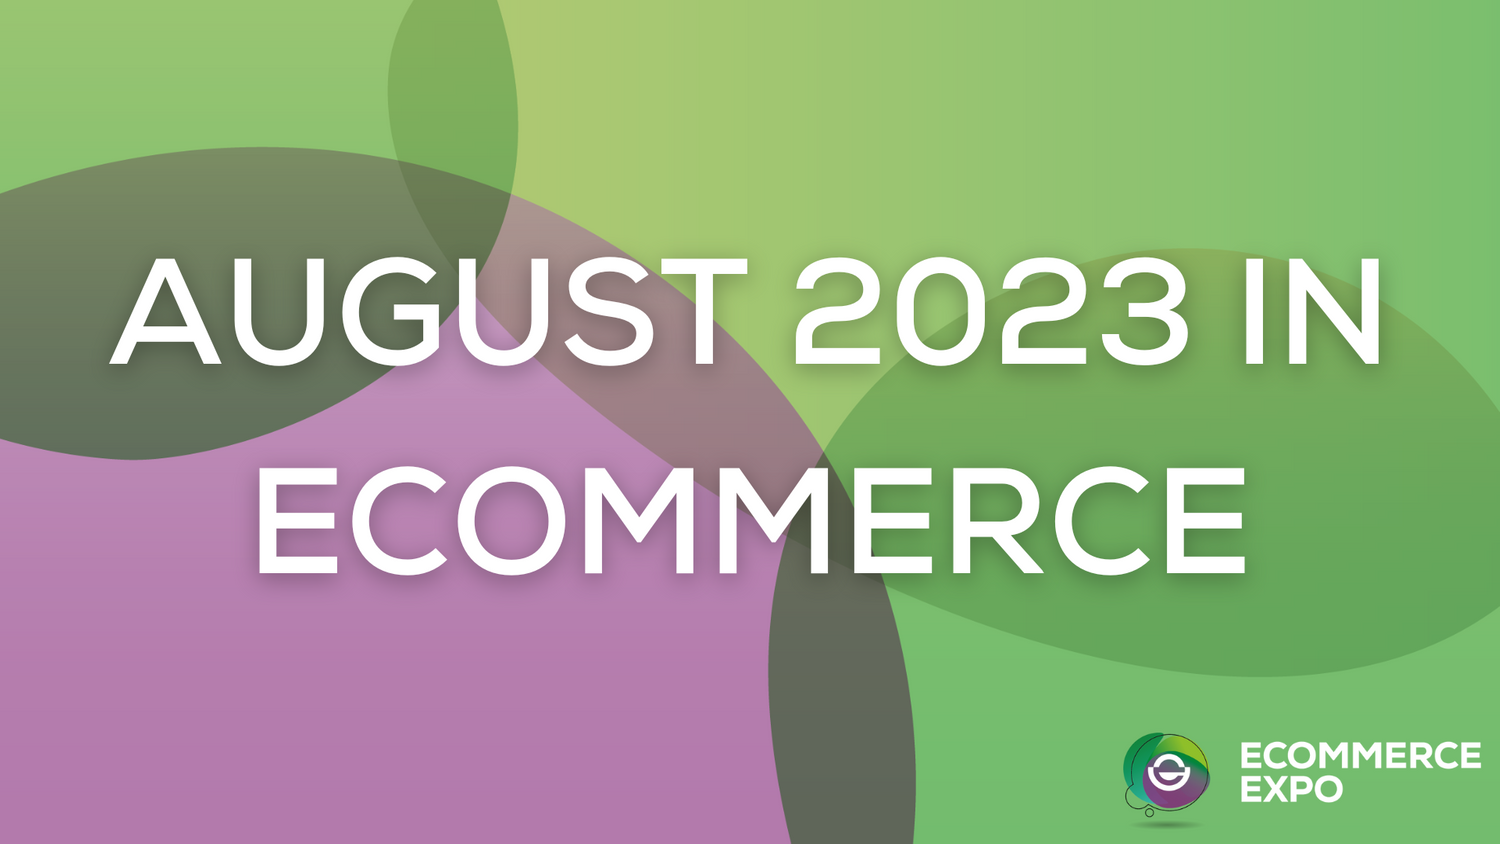 August 2023 in eCommerce